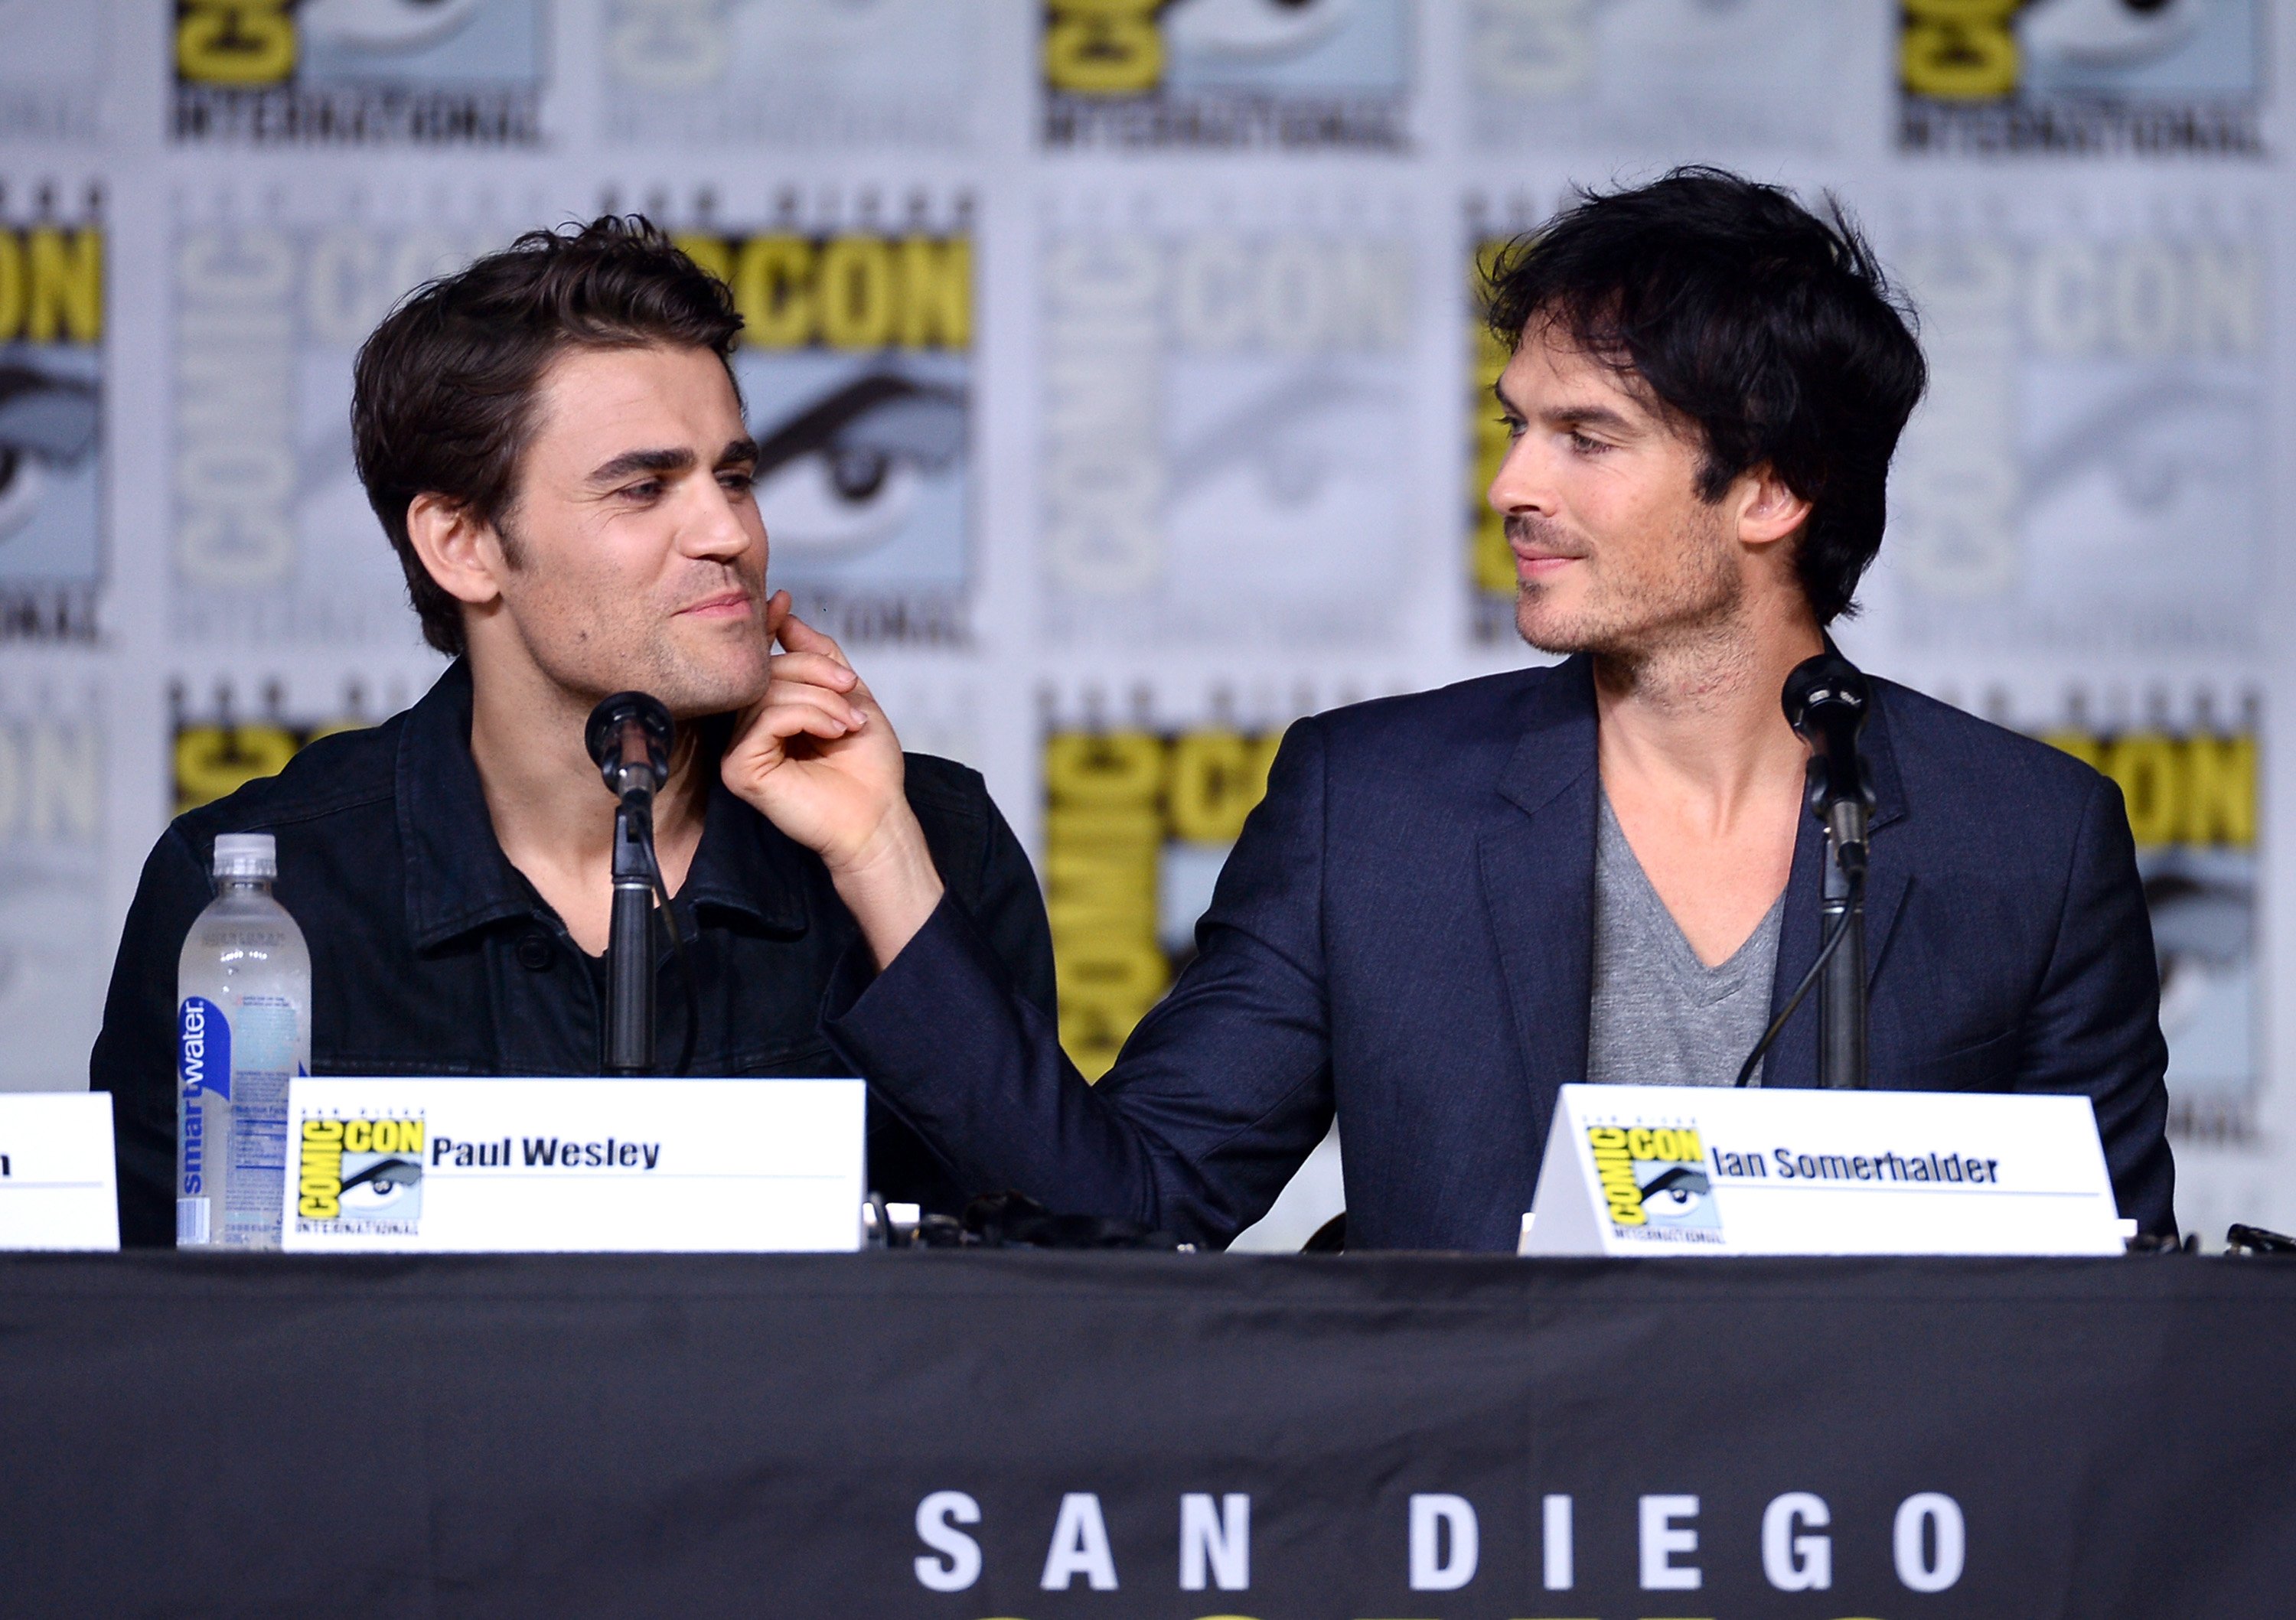 Paul Wesley and Ian Somerhalder, the cast of 'The Vampire Diaries,' sit onstage during a Comic-Con panel. Wesley wears a black button-up shirt. Somerhalder wears a blue suit over a gray shirt while brushing his hand across Wesley's cheek.